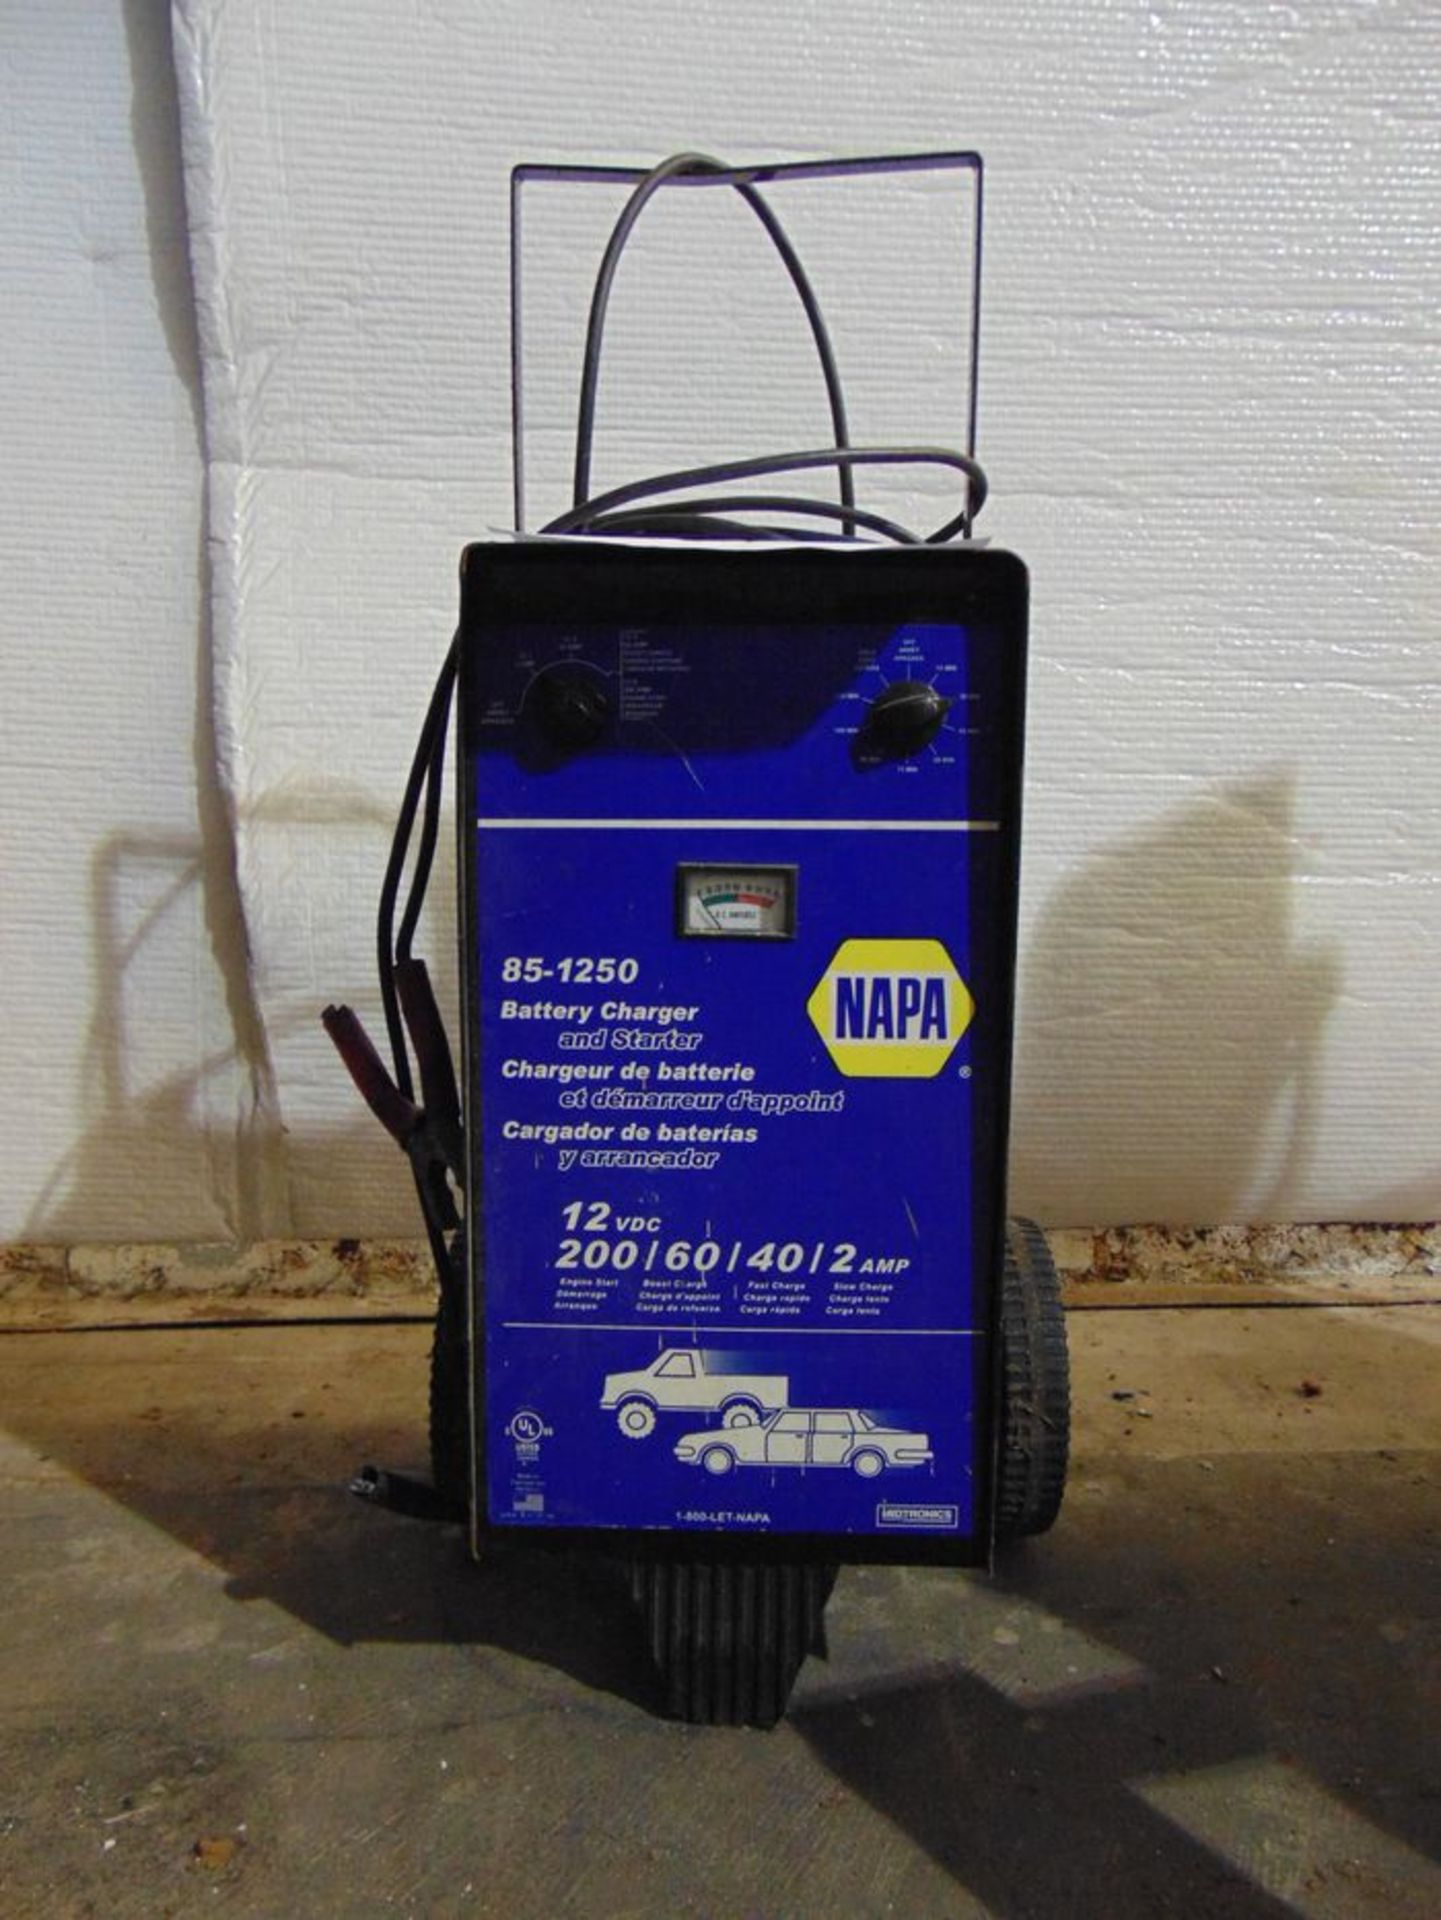 Napa Battery charger: 12V DC, 200/60/40/2 Amp, Located At: 2222 Poydras St, New Orleans, LA 70119+ - Image 2 of 3